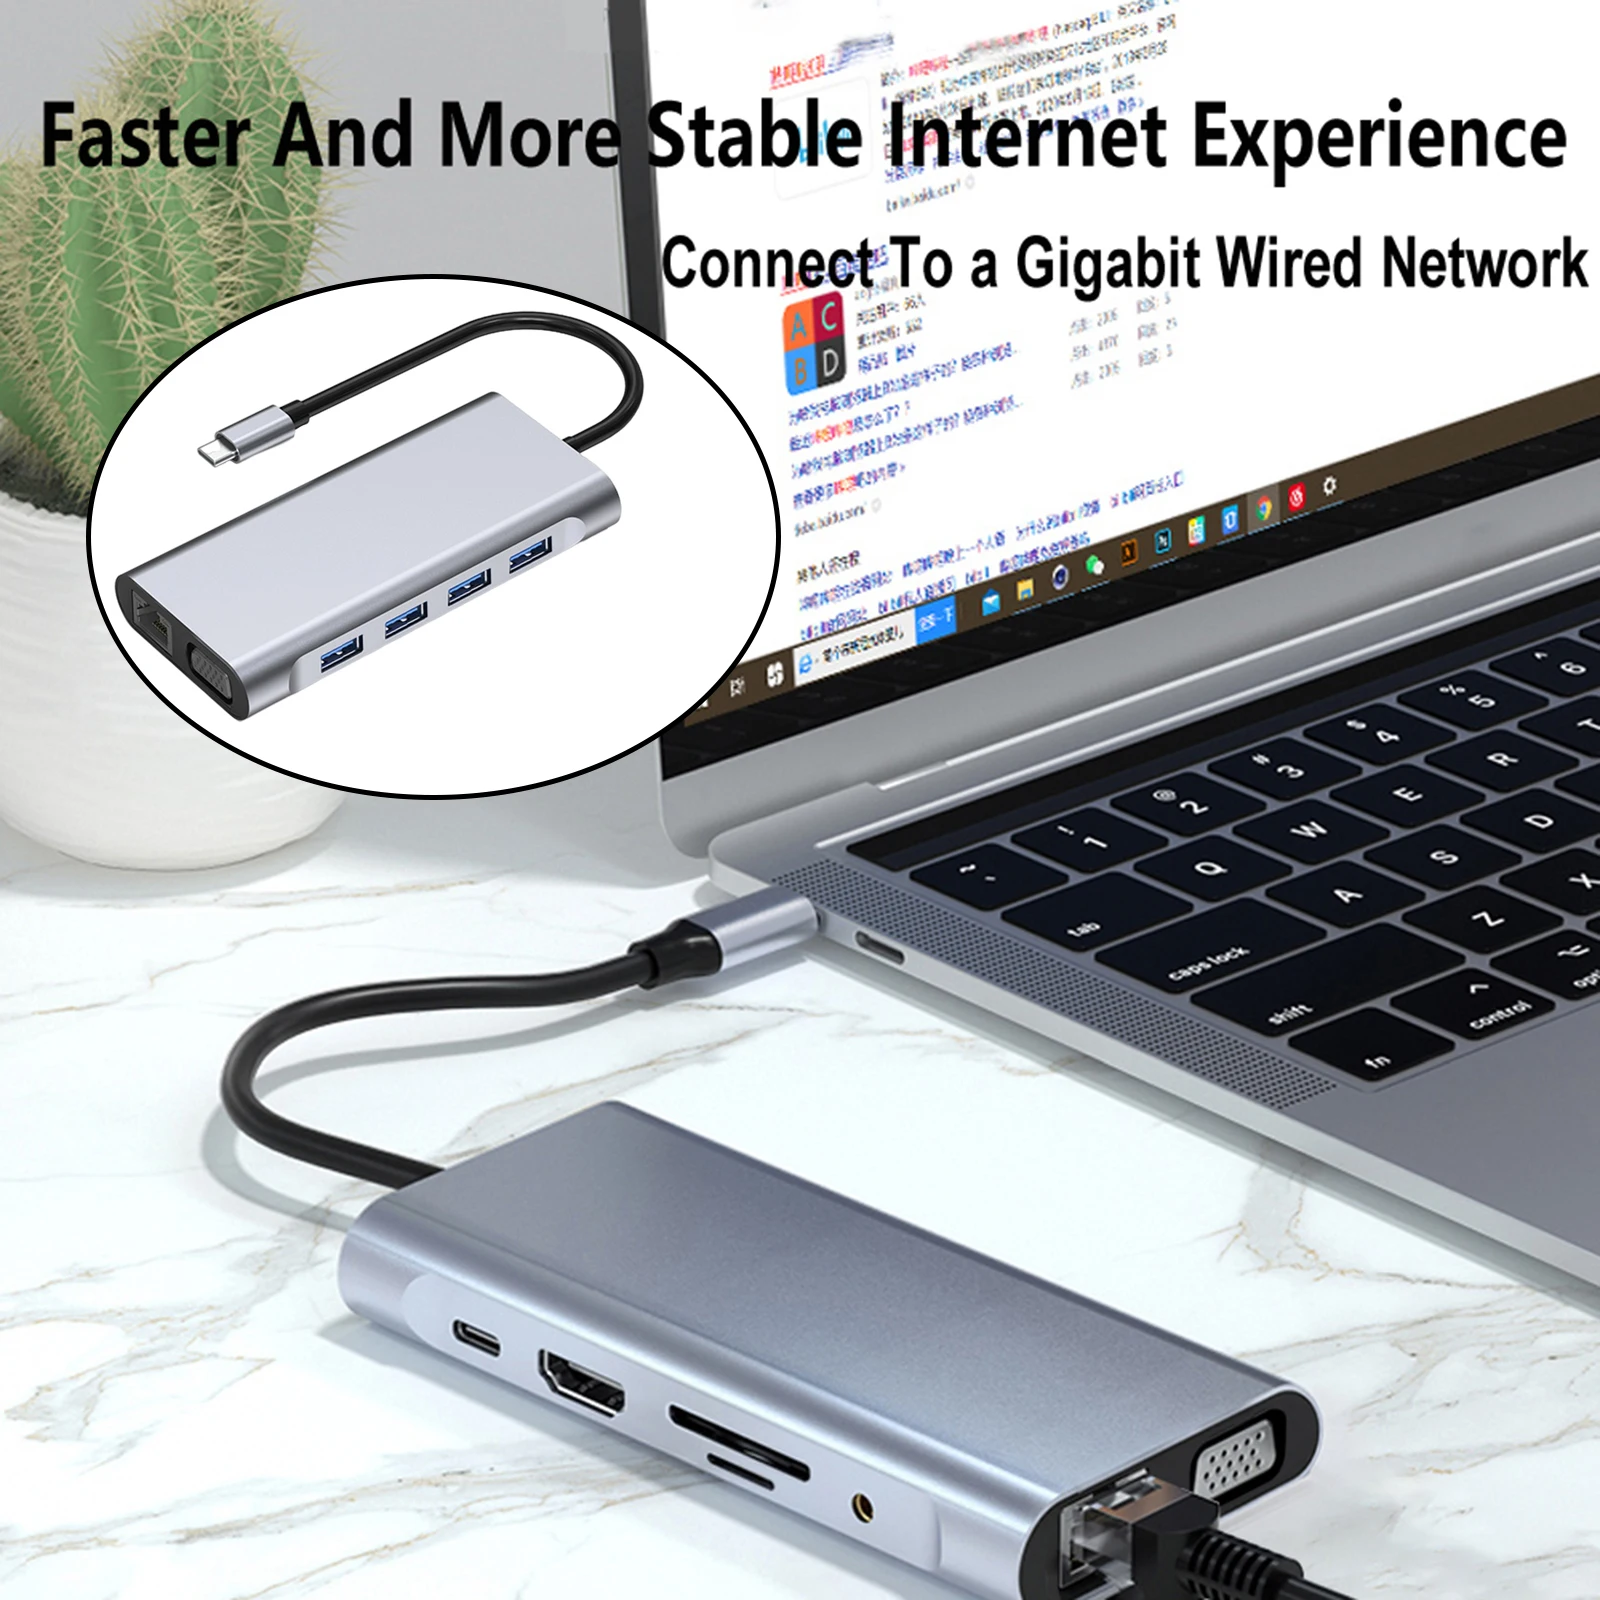 11 in 1 USB C Hub Multiport Adapter Portable Space 4 USB 3.0 Ports  for MacBook Pro Air XPS Type C Devices Mobile Phones